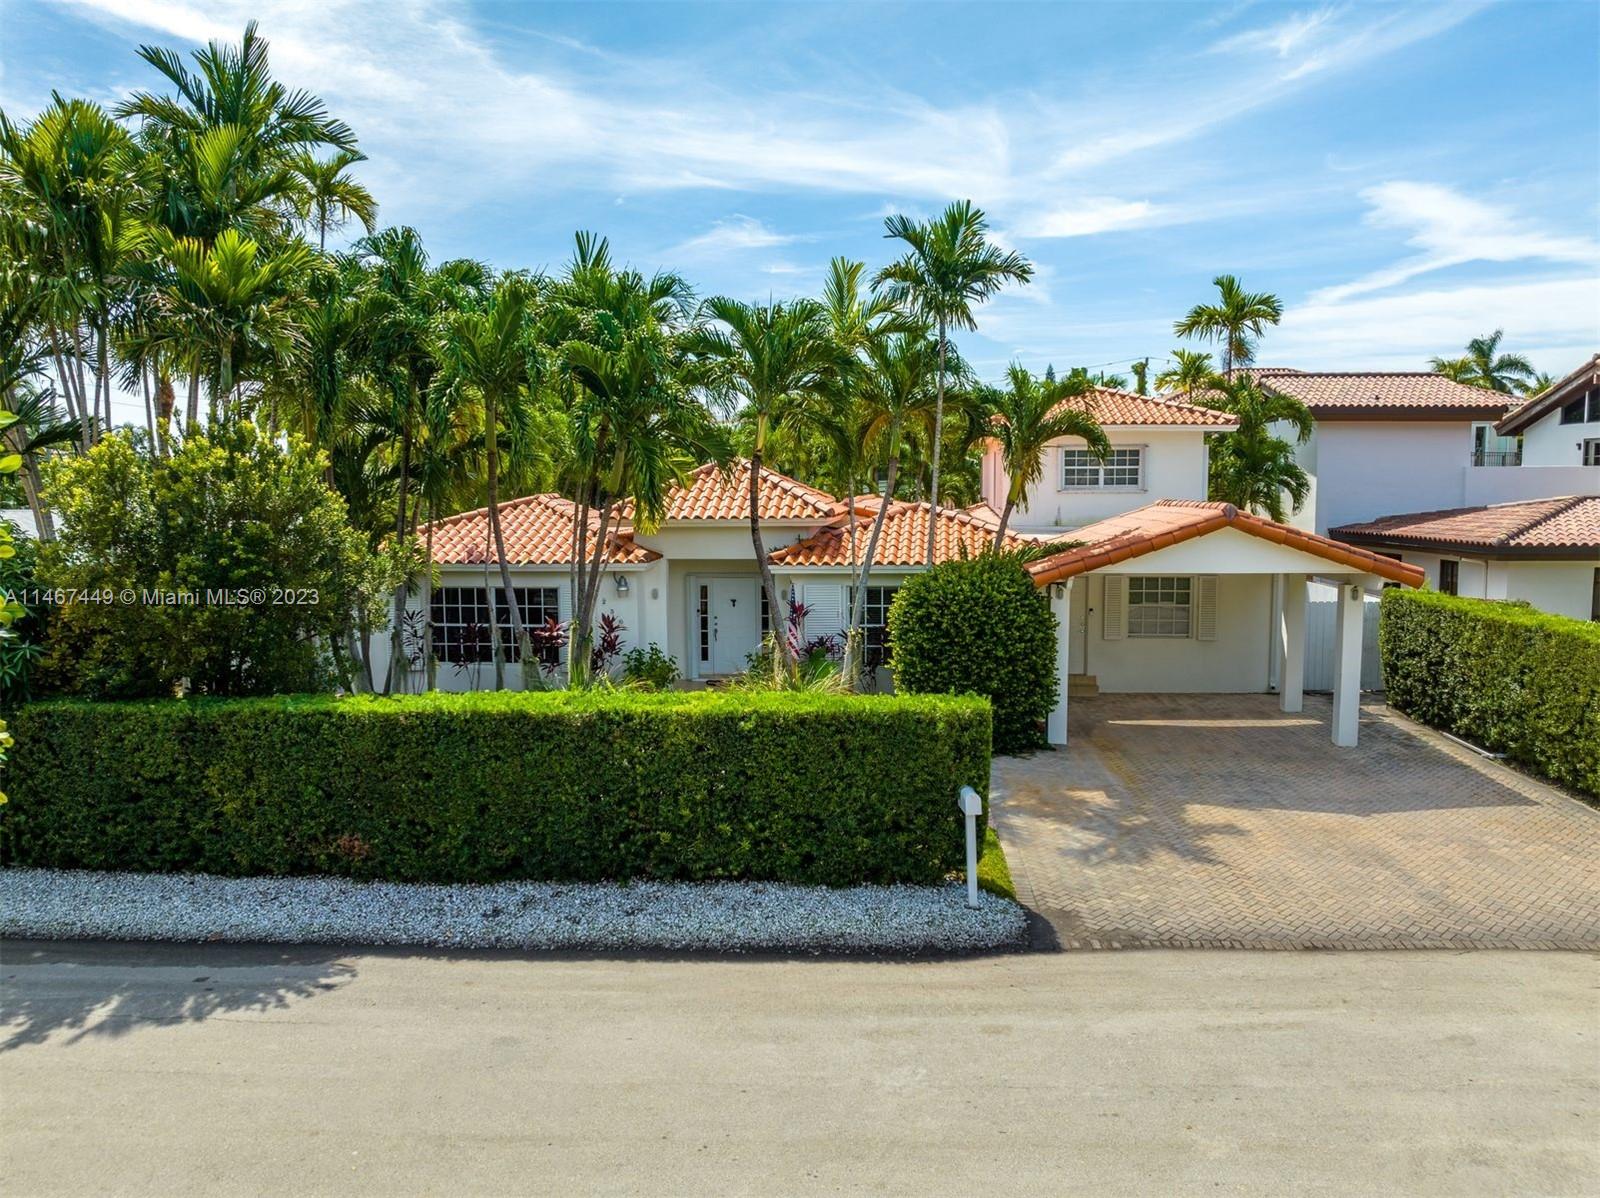 250 Greenwood Drive Dr, Key Biscayne, Miami-Dade County, Florida - 5 Bedrooms  
5 Bathrooms - 